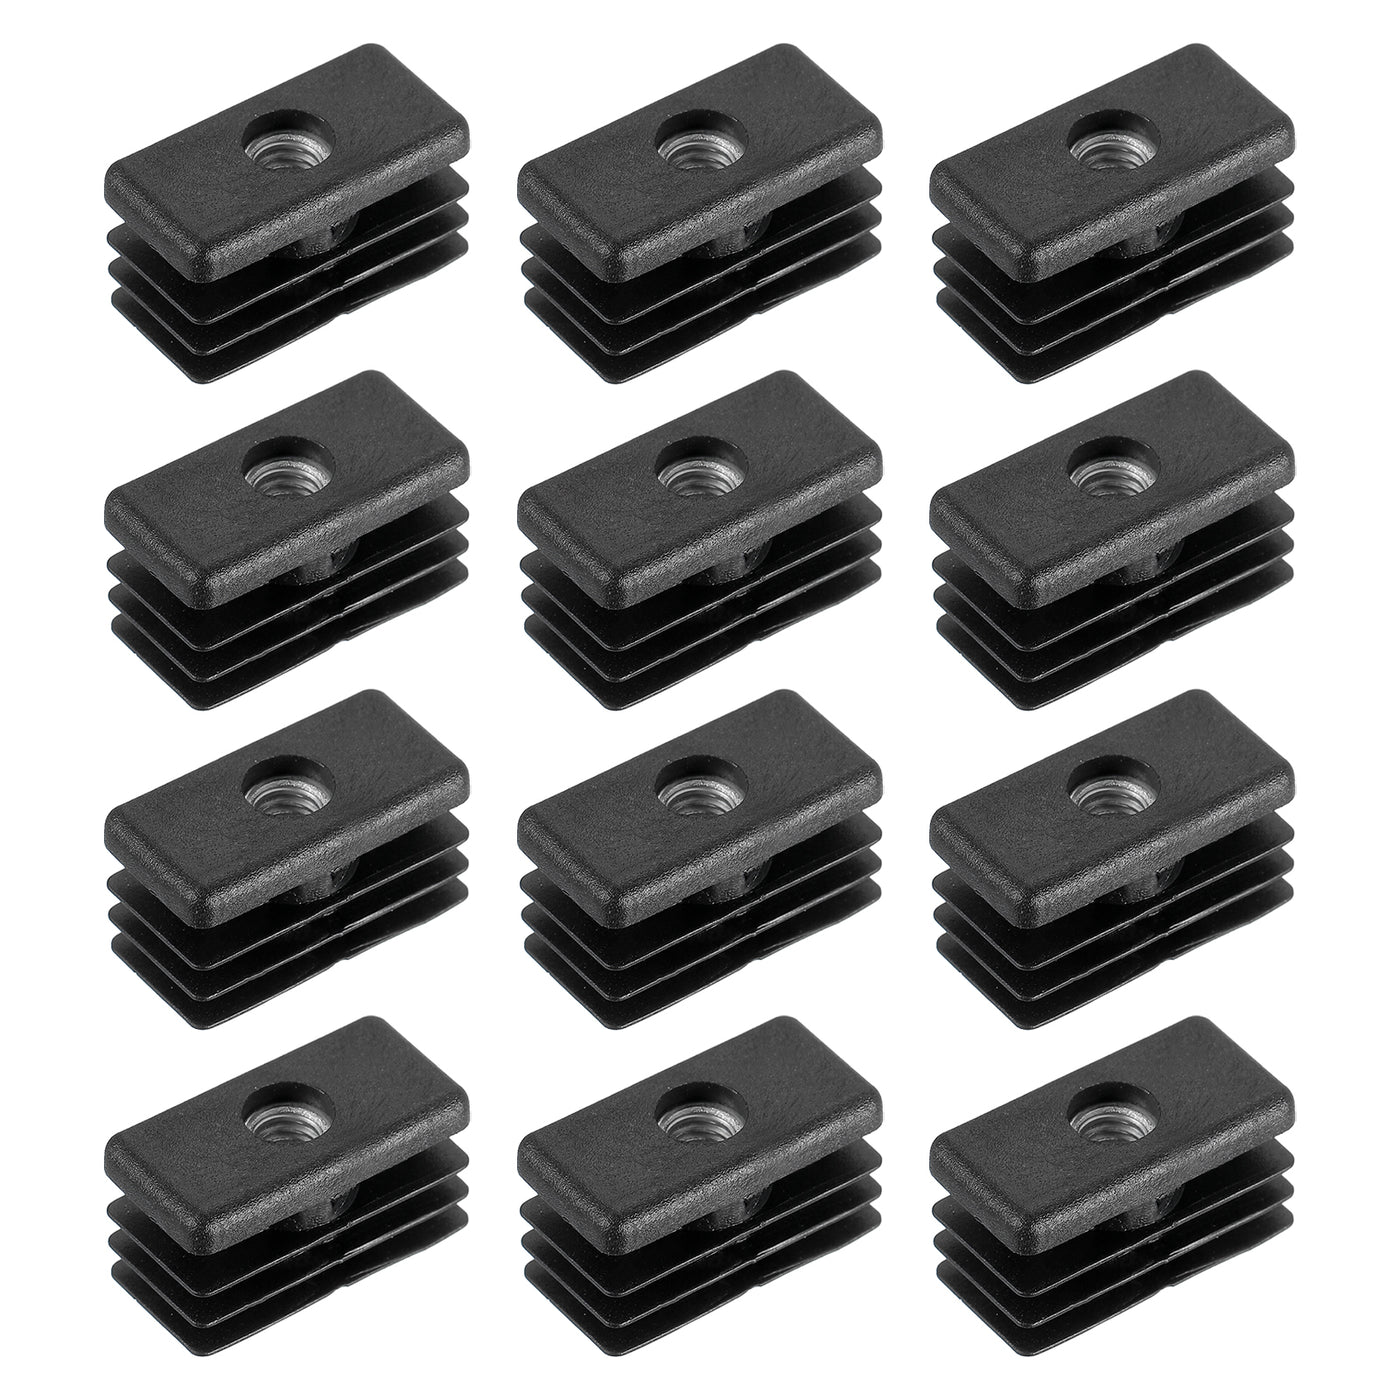 uxcell Uxcell 12Pcs 1.18"x0.59" Caster Insert with Thread, Rectangle M6 Thread for Furniture